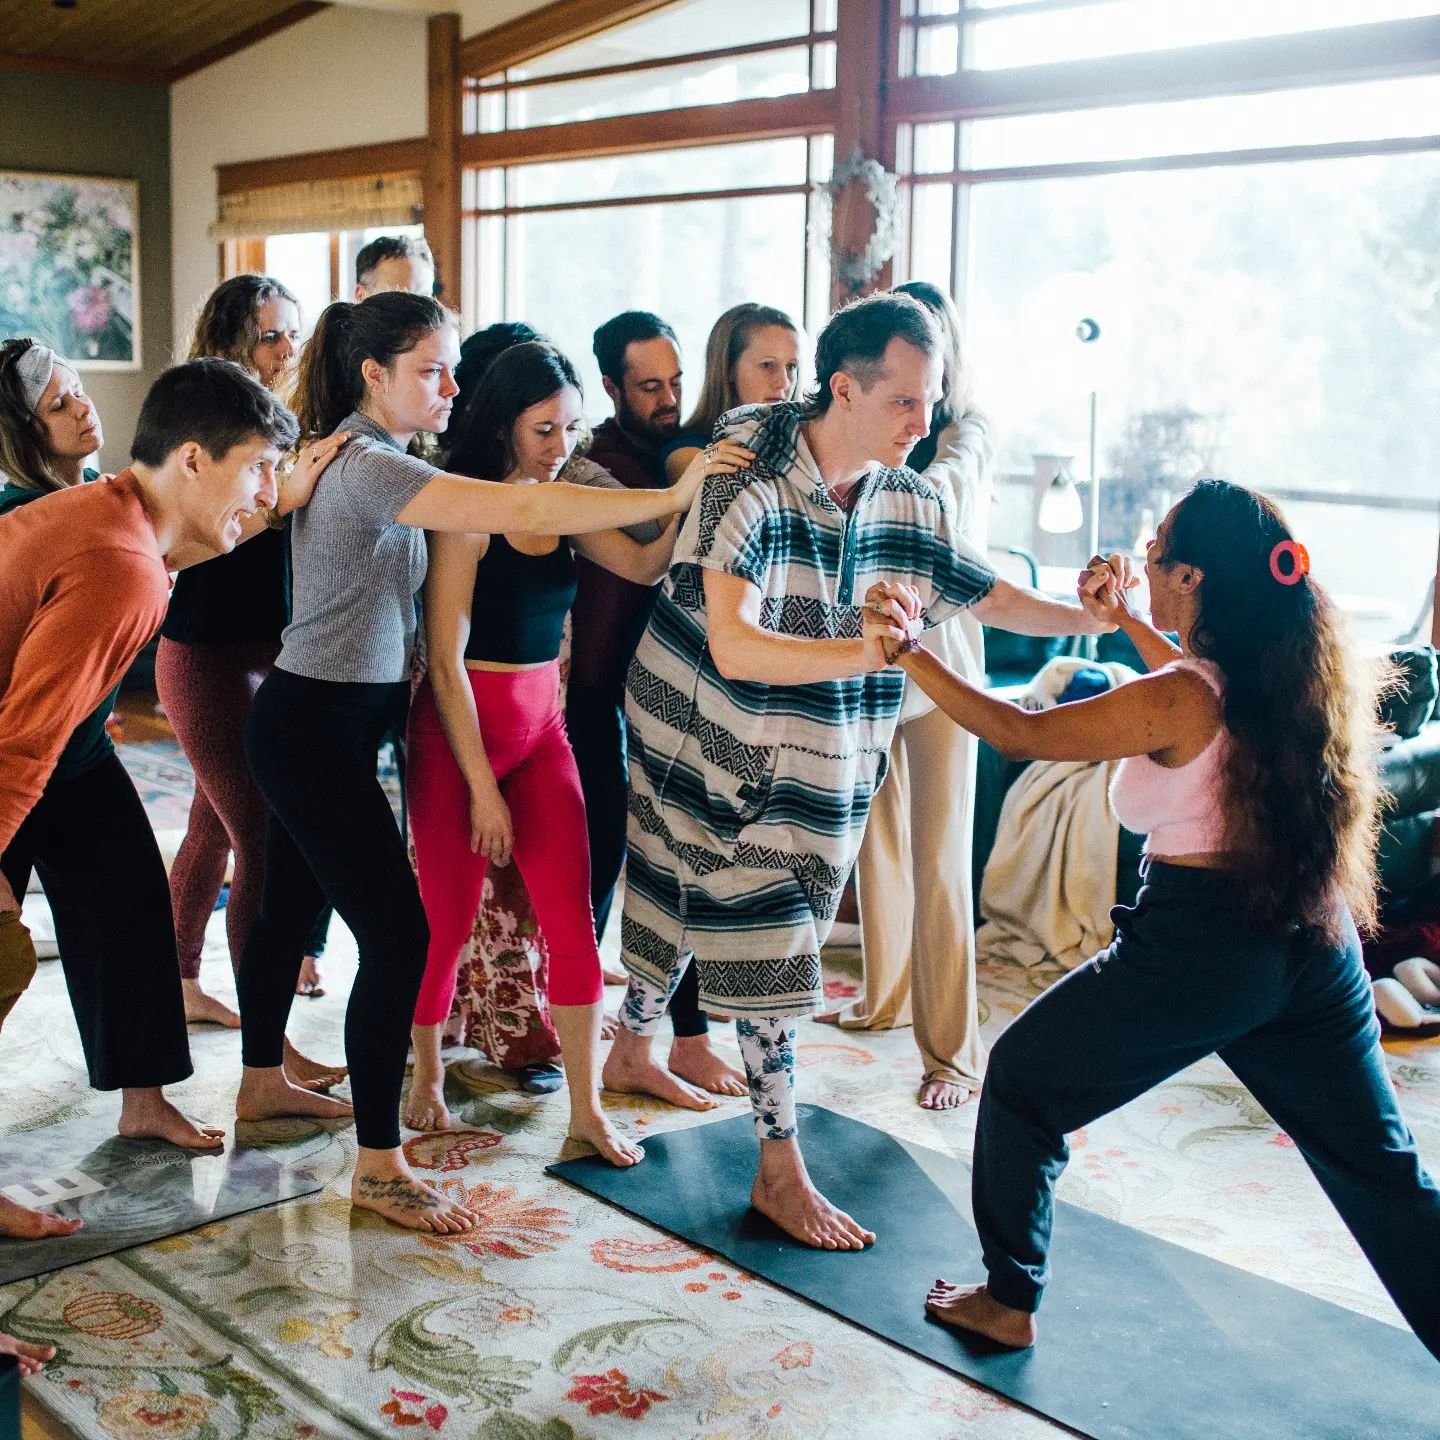 We have four spots left for our Somatic Embodiment Training, Level 1! 

August 21st - 28th
🔹Two days online 
🔹Five days on retreat 

This is a Breathwork Facilitator and Somatic Coaching retreat-style certification program.

At the core of our trai